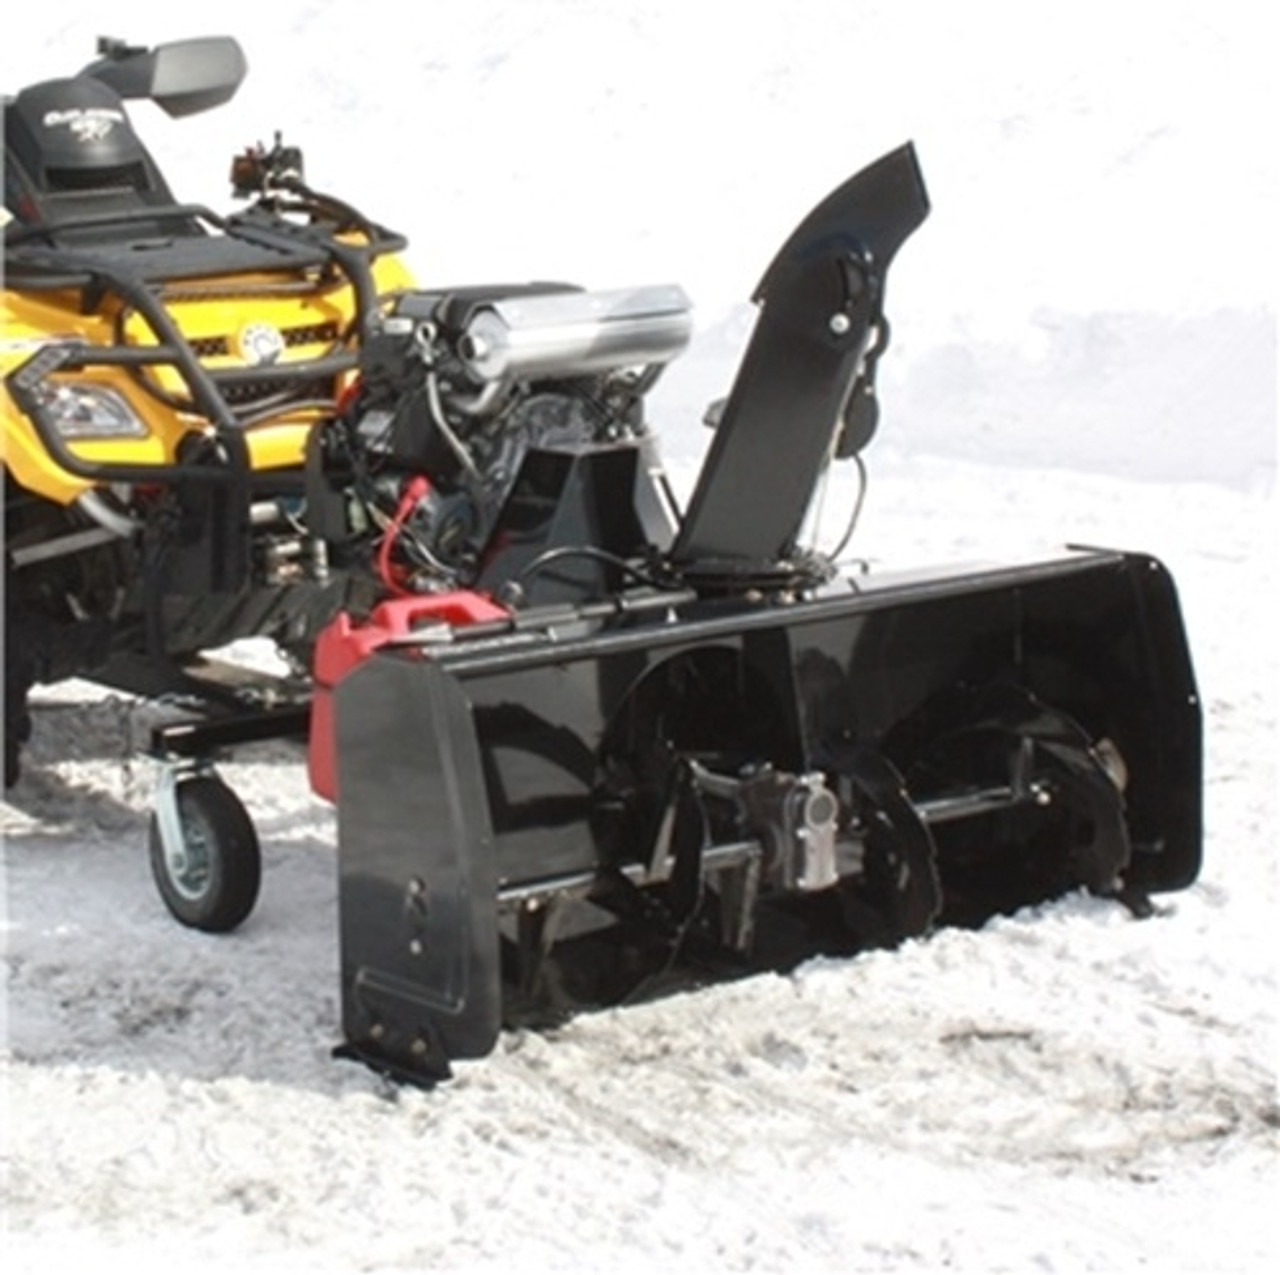 A front-oblique image of a 54-inch Bercomac snow plow, installed on an ATV and parked on snowy terrain.